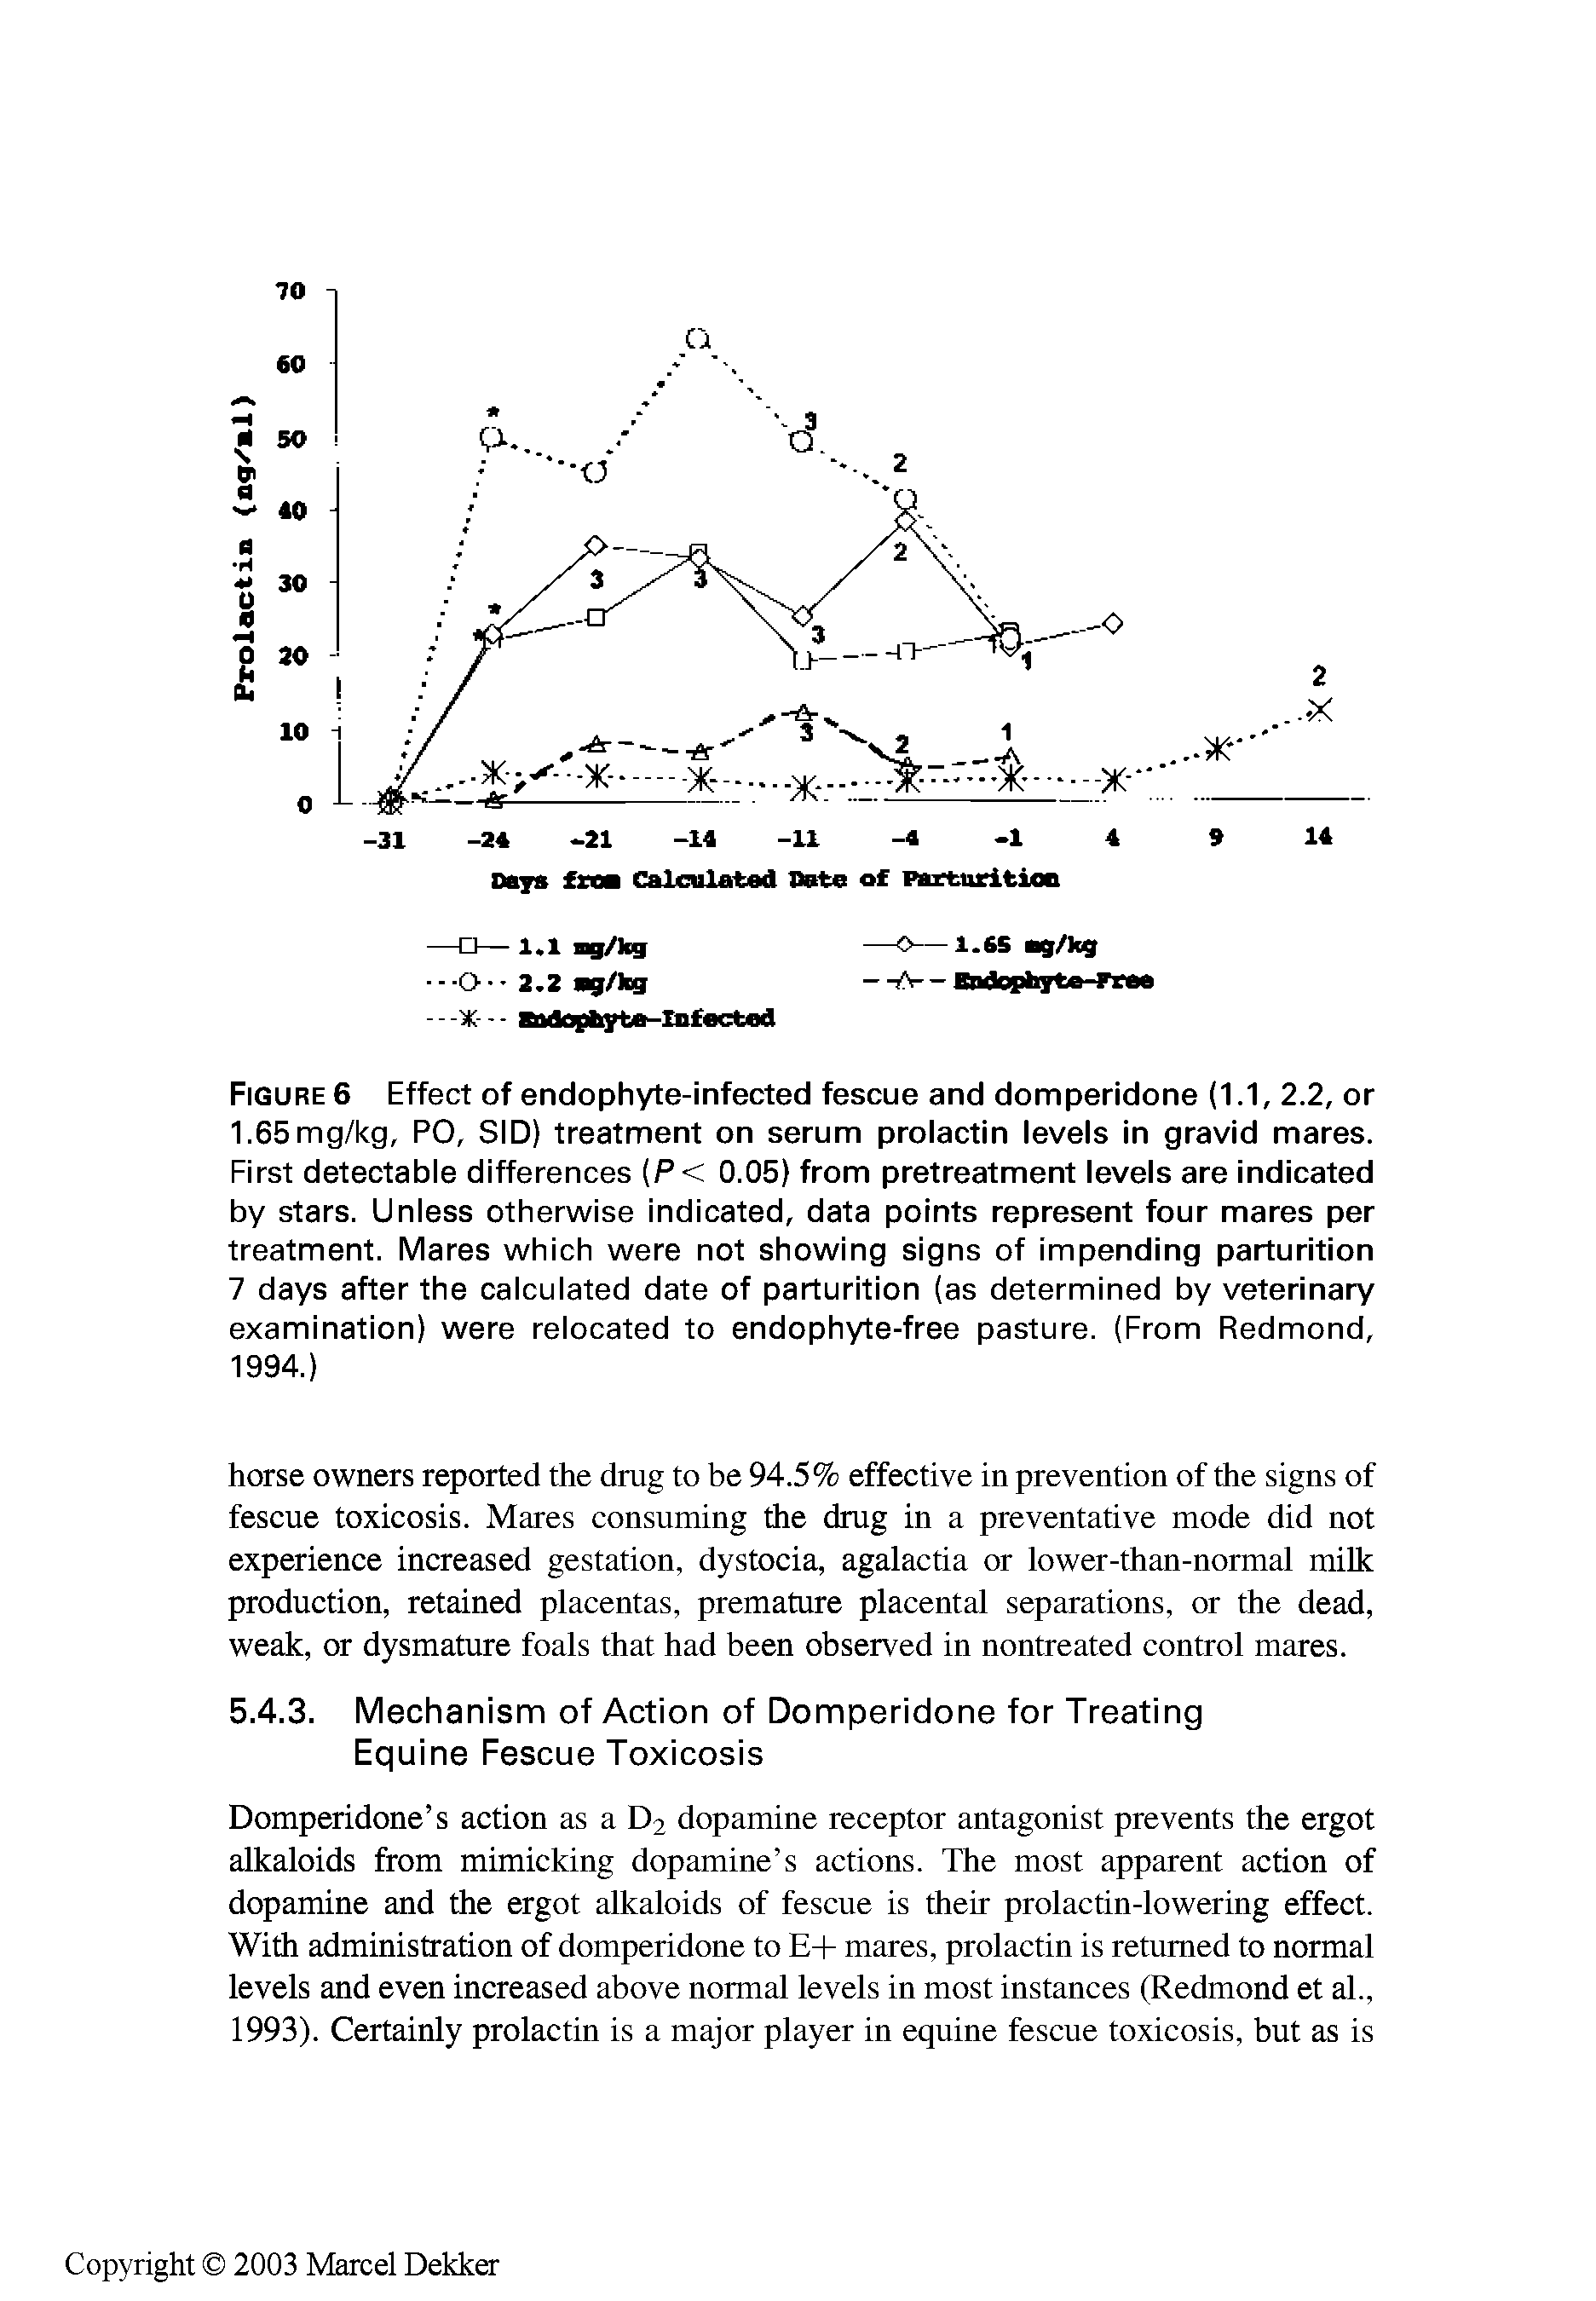 Figure 6 Effect of endophyte-infected fescue and domperidone (1.1, 2.2, or 1.65mg/kg, PO, SID) treatment on serum prolactin levels in gravid mares. First detectable differences (P< 0.05) from pretreatment levels are indicated by stars. Unless otherwise indicated, data points represent four mares per treatment. Mares which were not showing signs of impending parturition 7 days after the calculated date of parturition (as determined by veterinary examination) were relocated to endophyte-free pasture. (From Redmond, 1994.)...